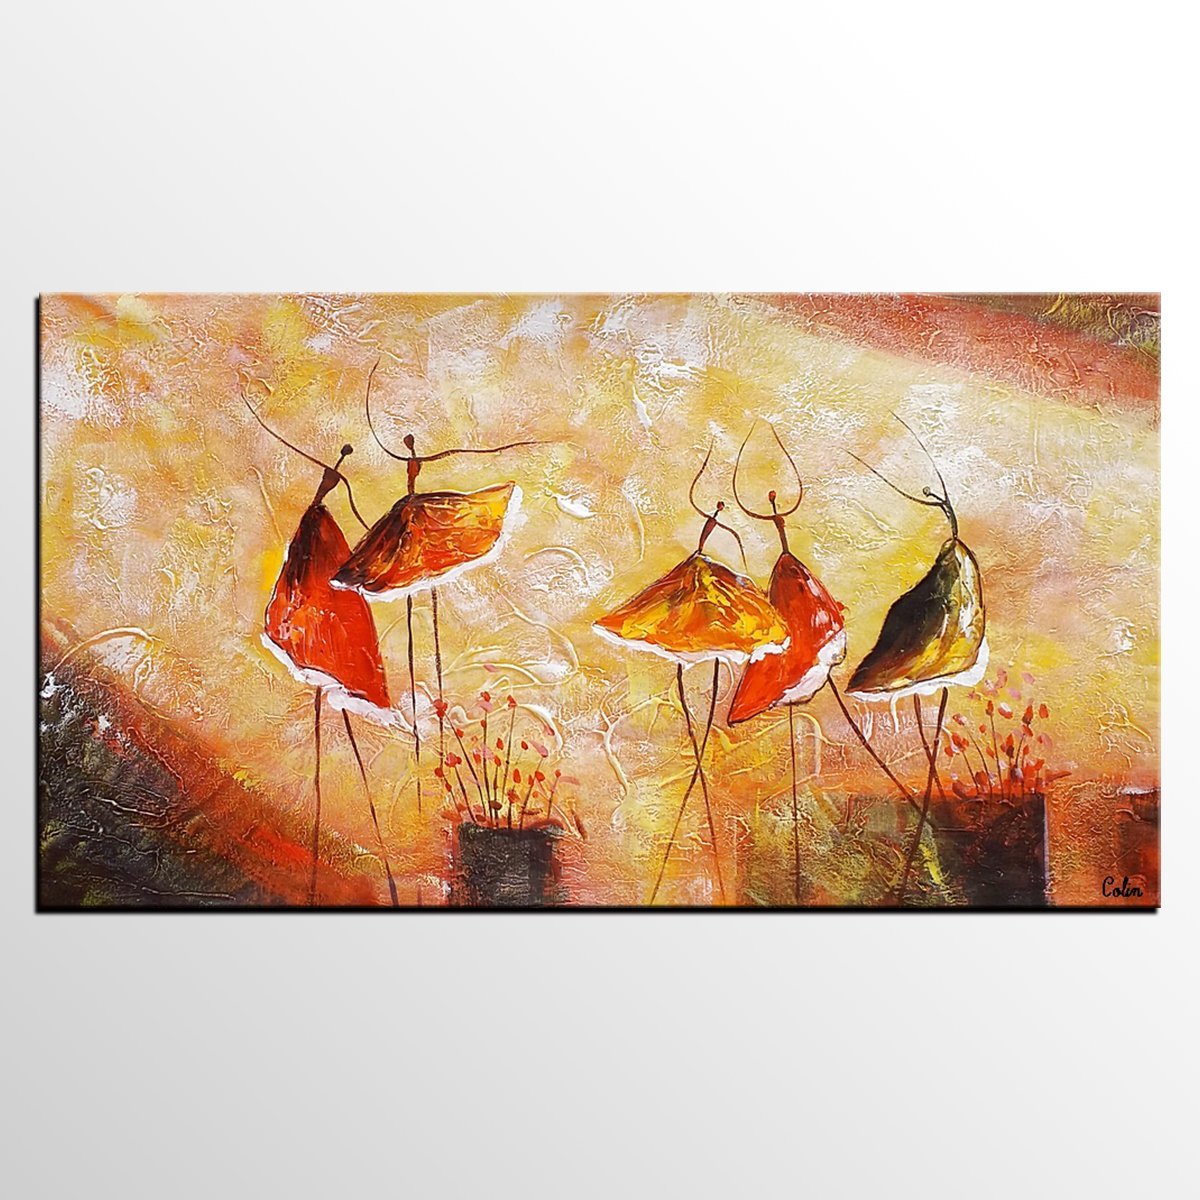 Modern Acrylic Painting, Ballet Dancer Painting, Bedroom Canvas Painting, Original Painting, Abtract Painting for Sale-LargePaintingArt.com